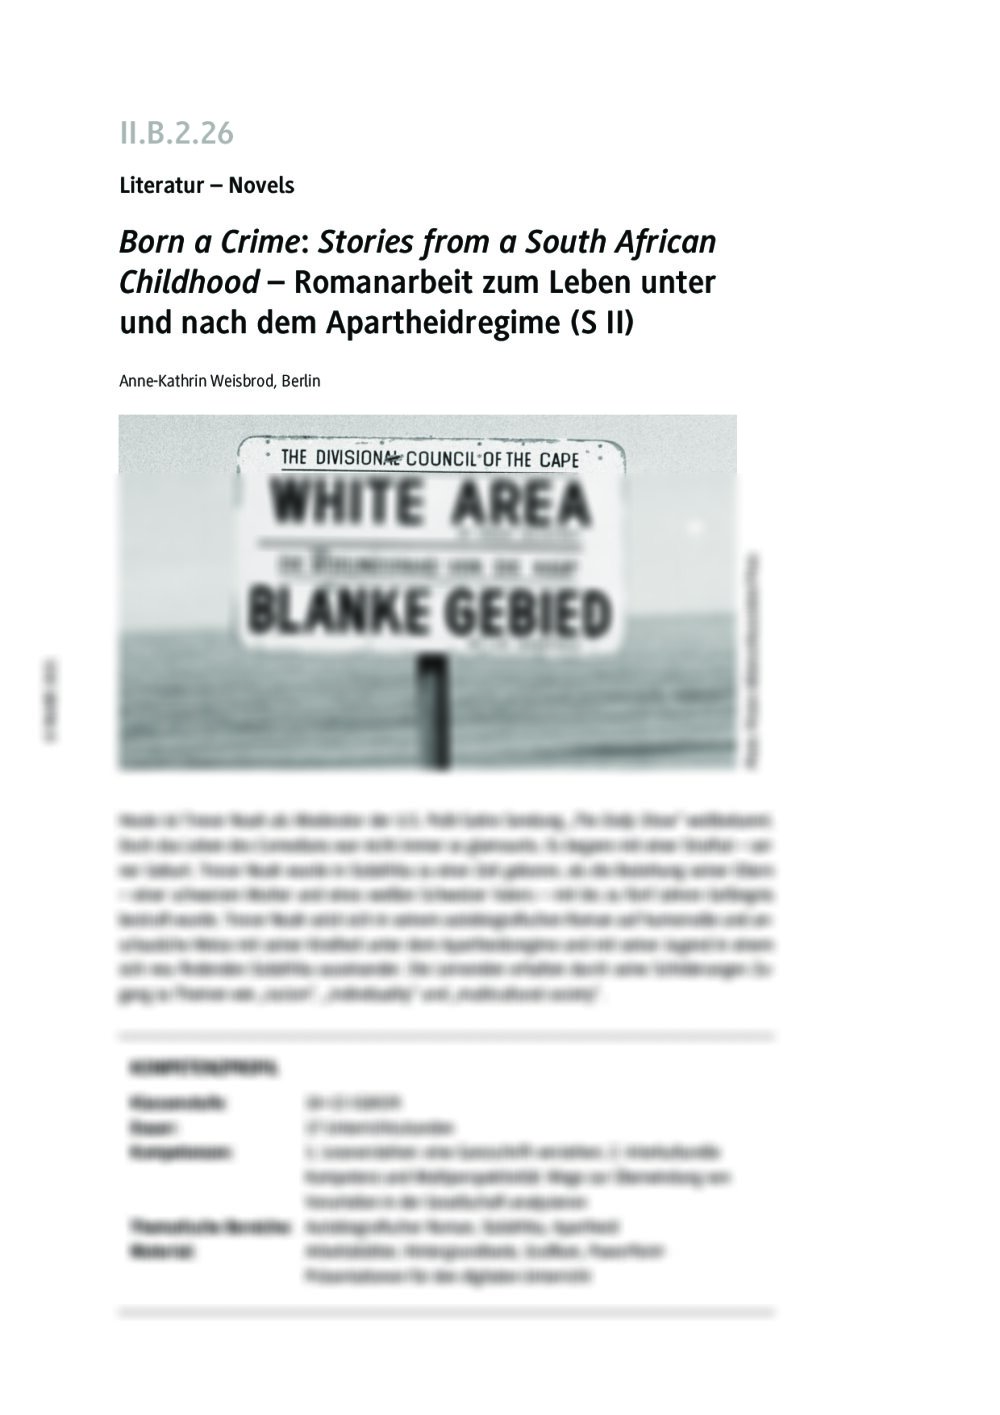 "Born a Crime: Stories from a South African Childhood" - Seite 1